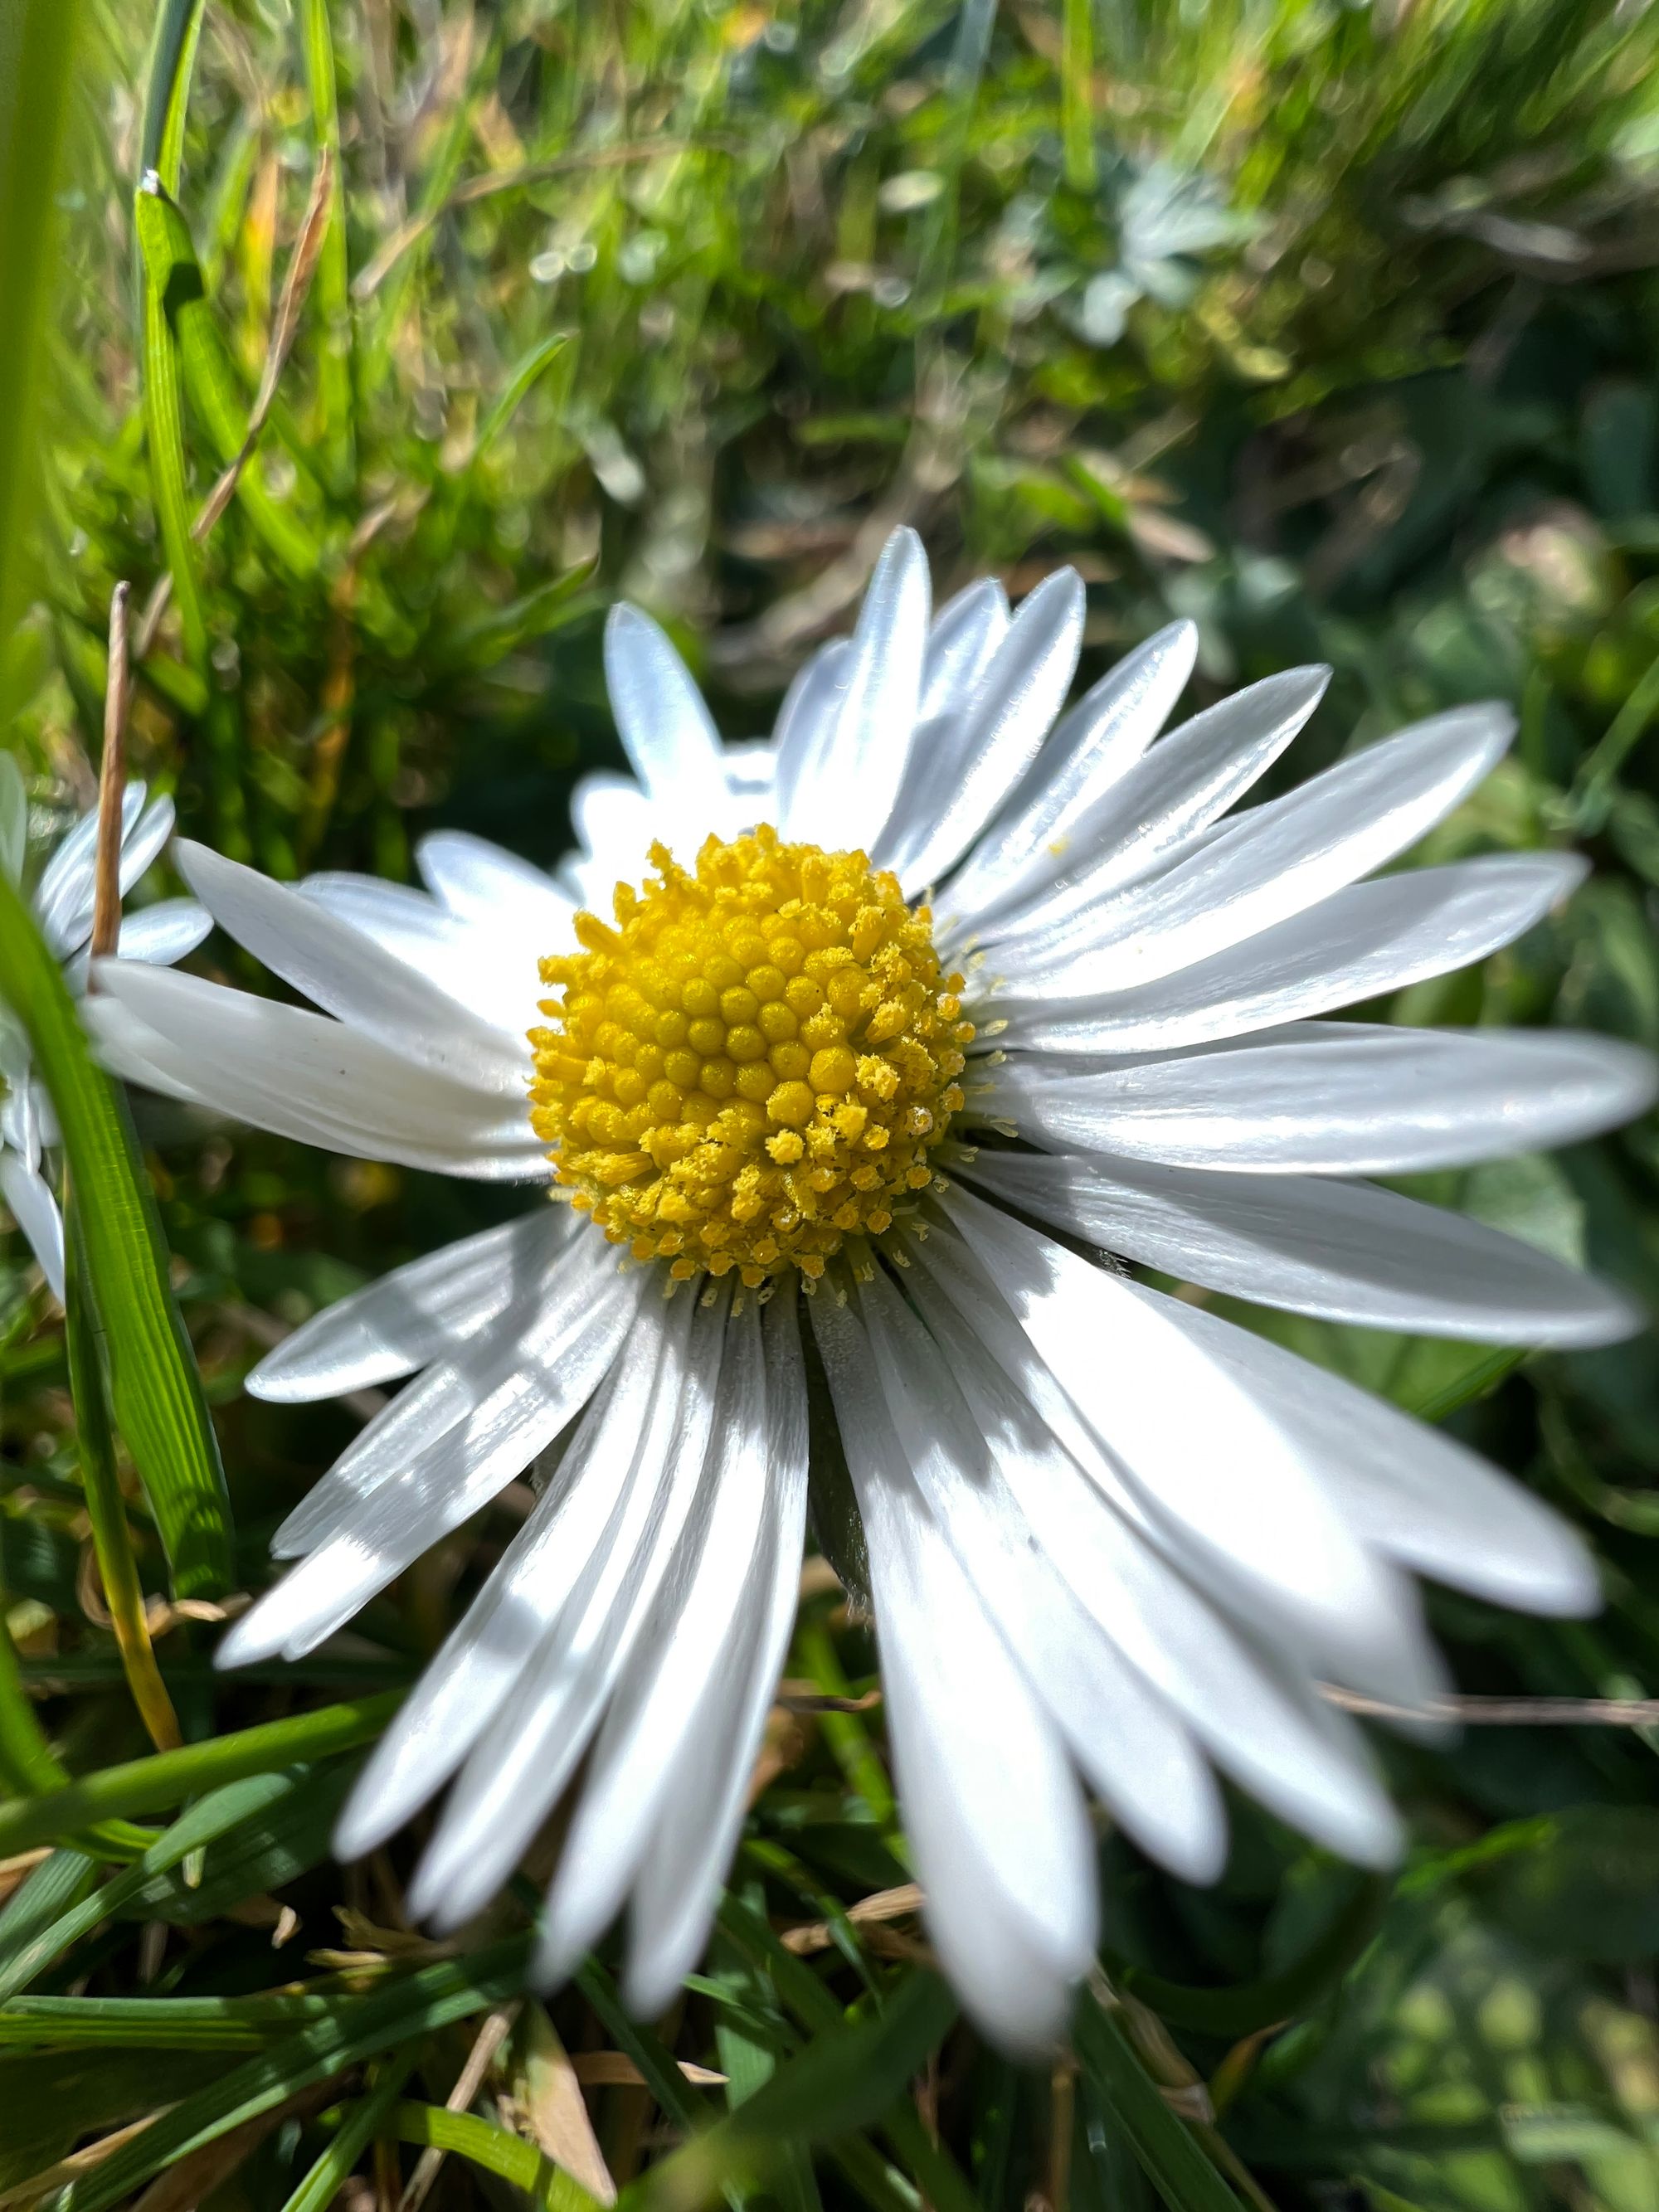 An extreme close-up of a daisy amongst green grass.